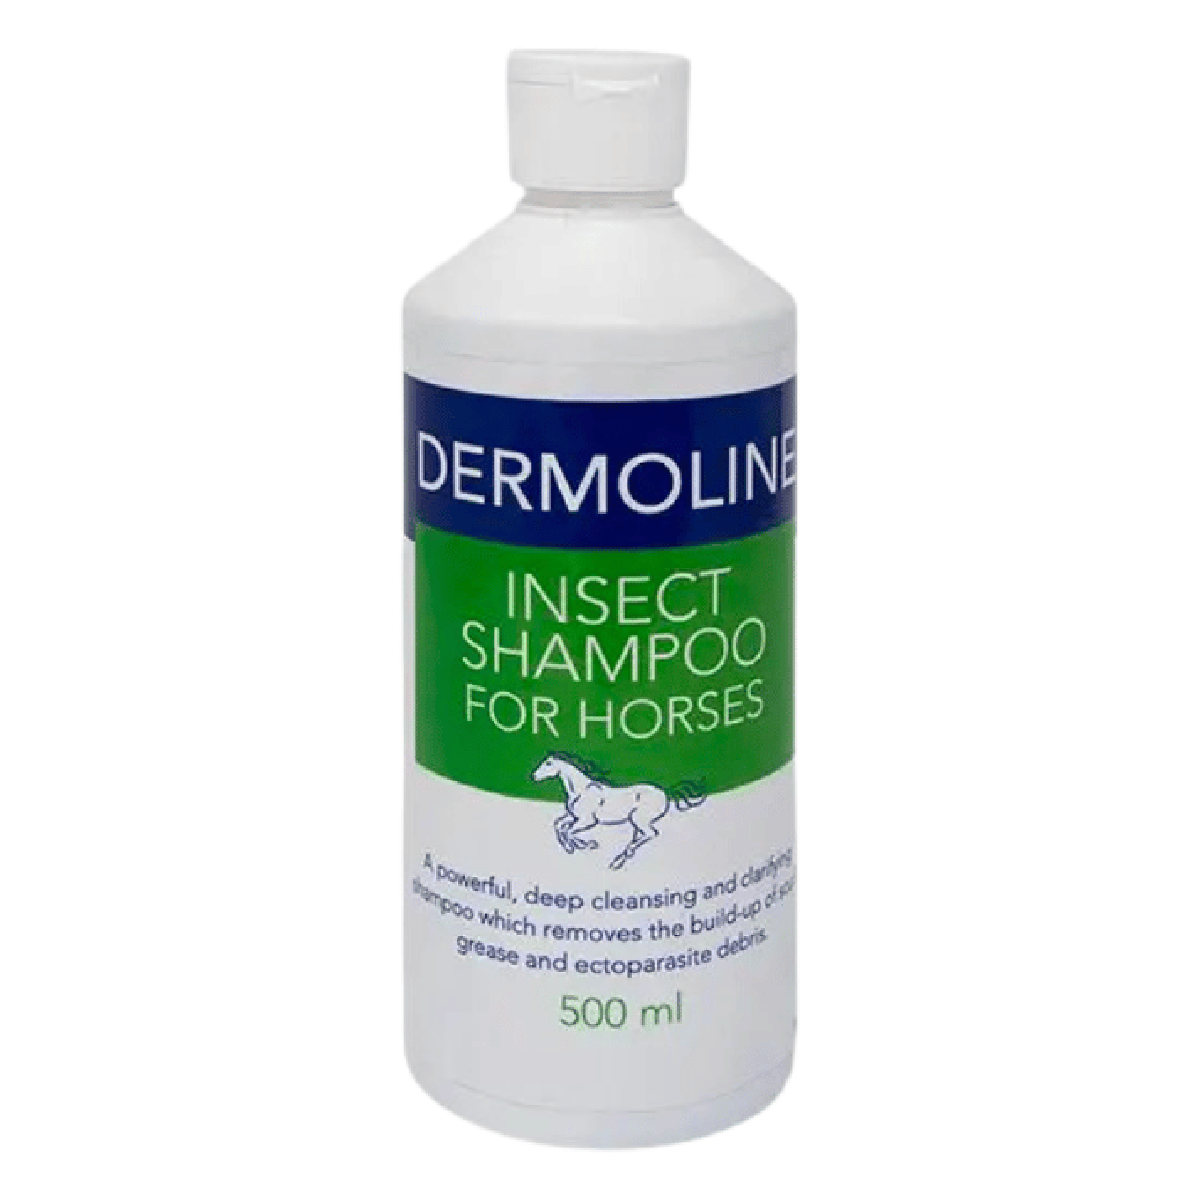 Dermoline Insecticidal Shampoo - for Horses